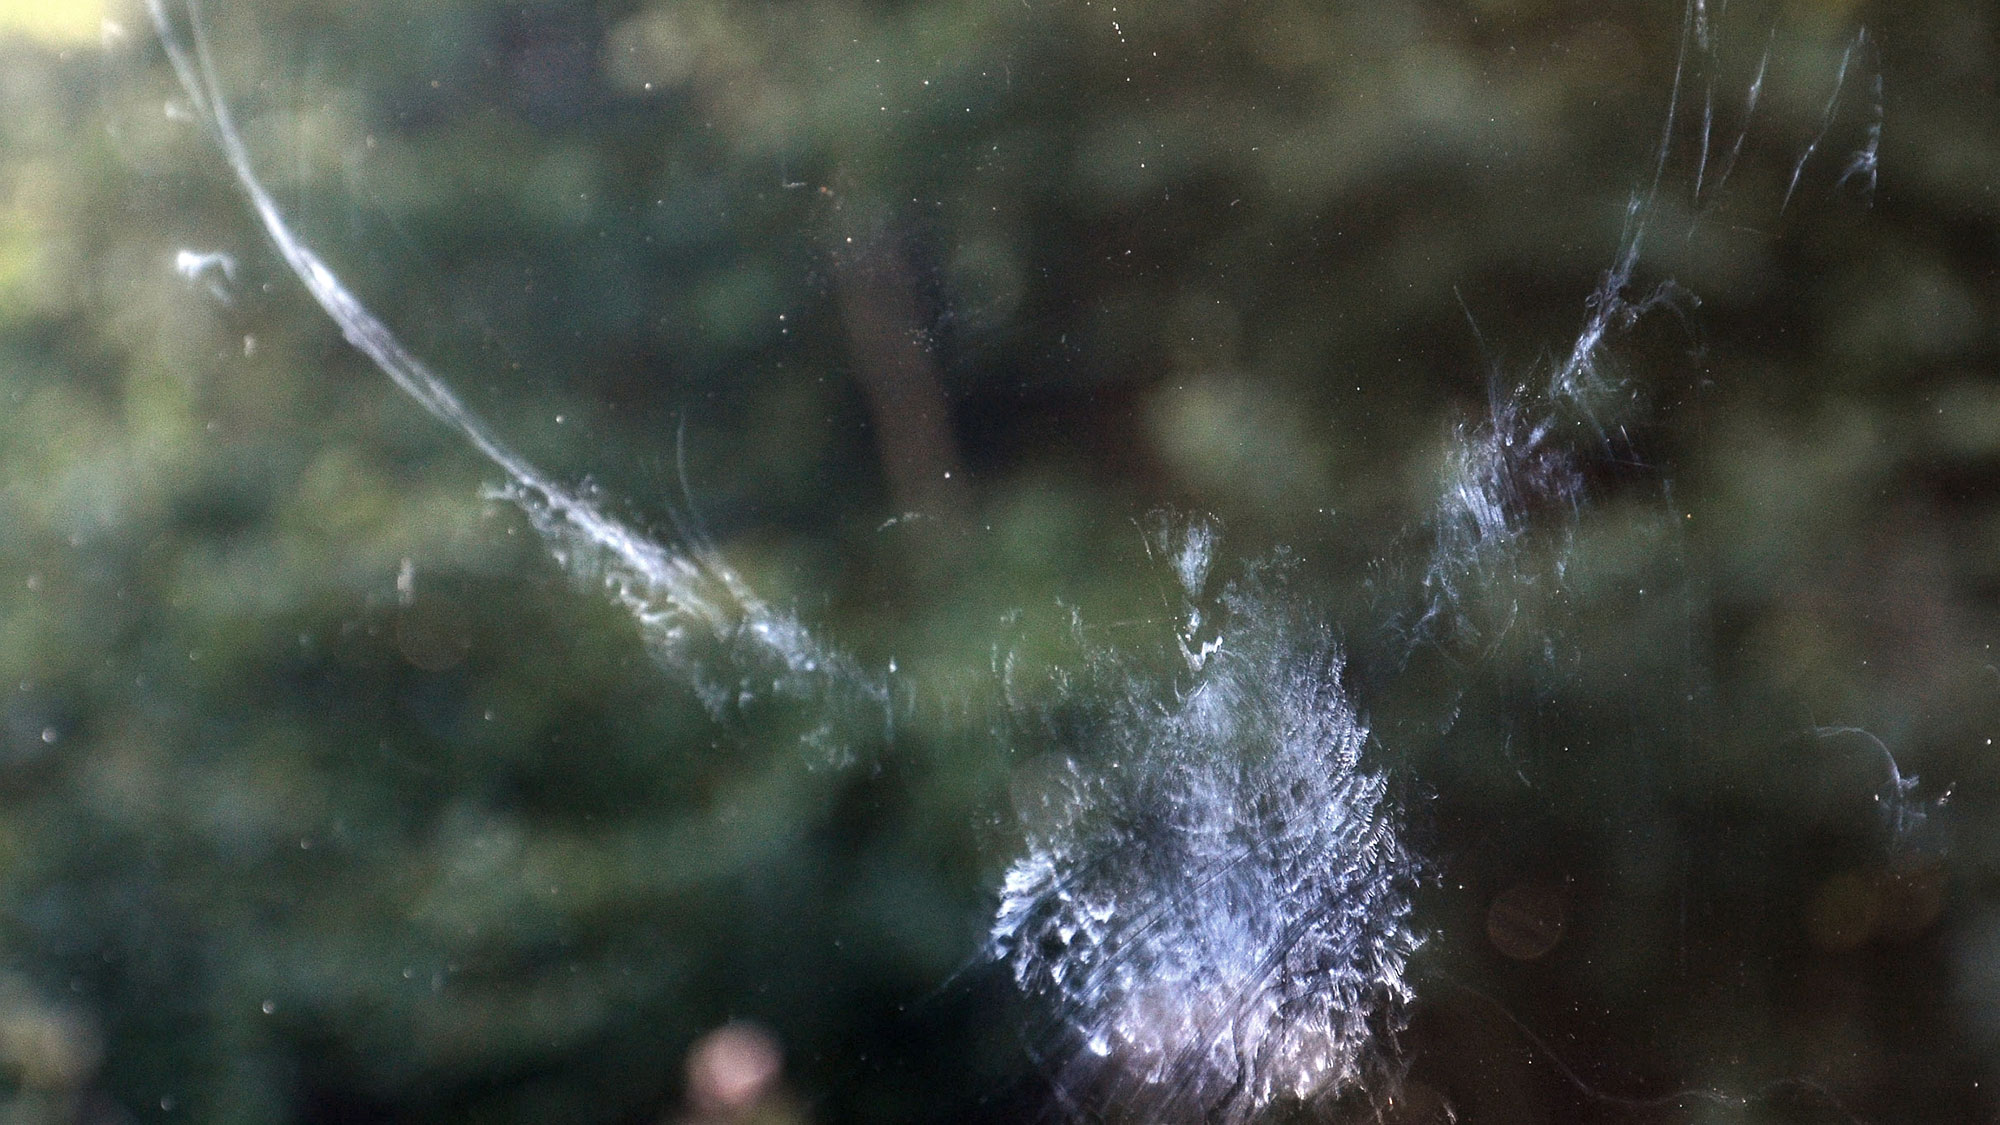 A close up of a bird collision on glass.